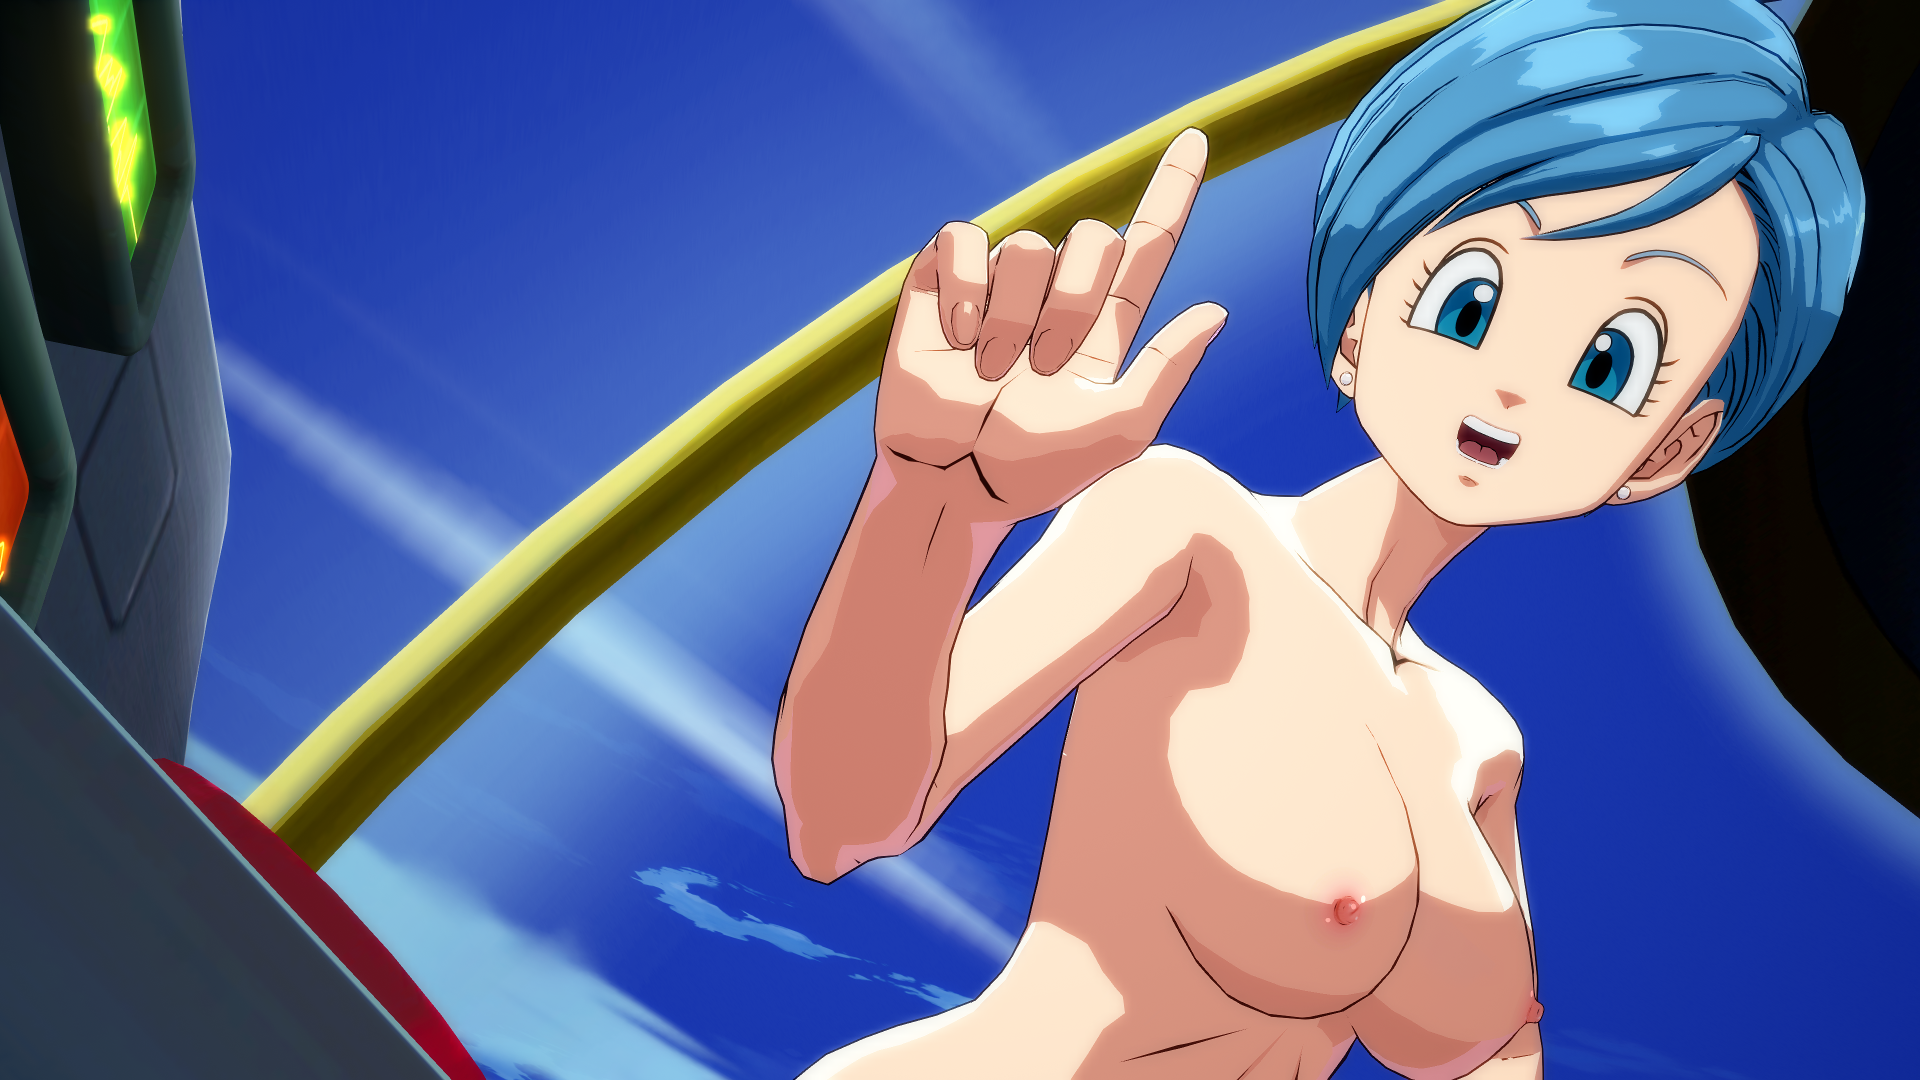 ...(basically hell for me). https://www.patreon.com/posts/bulma-nude-story-...